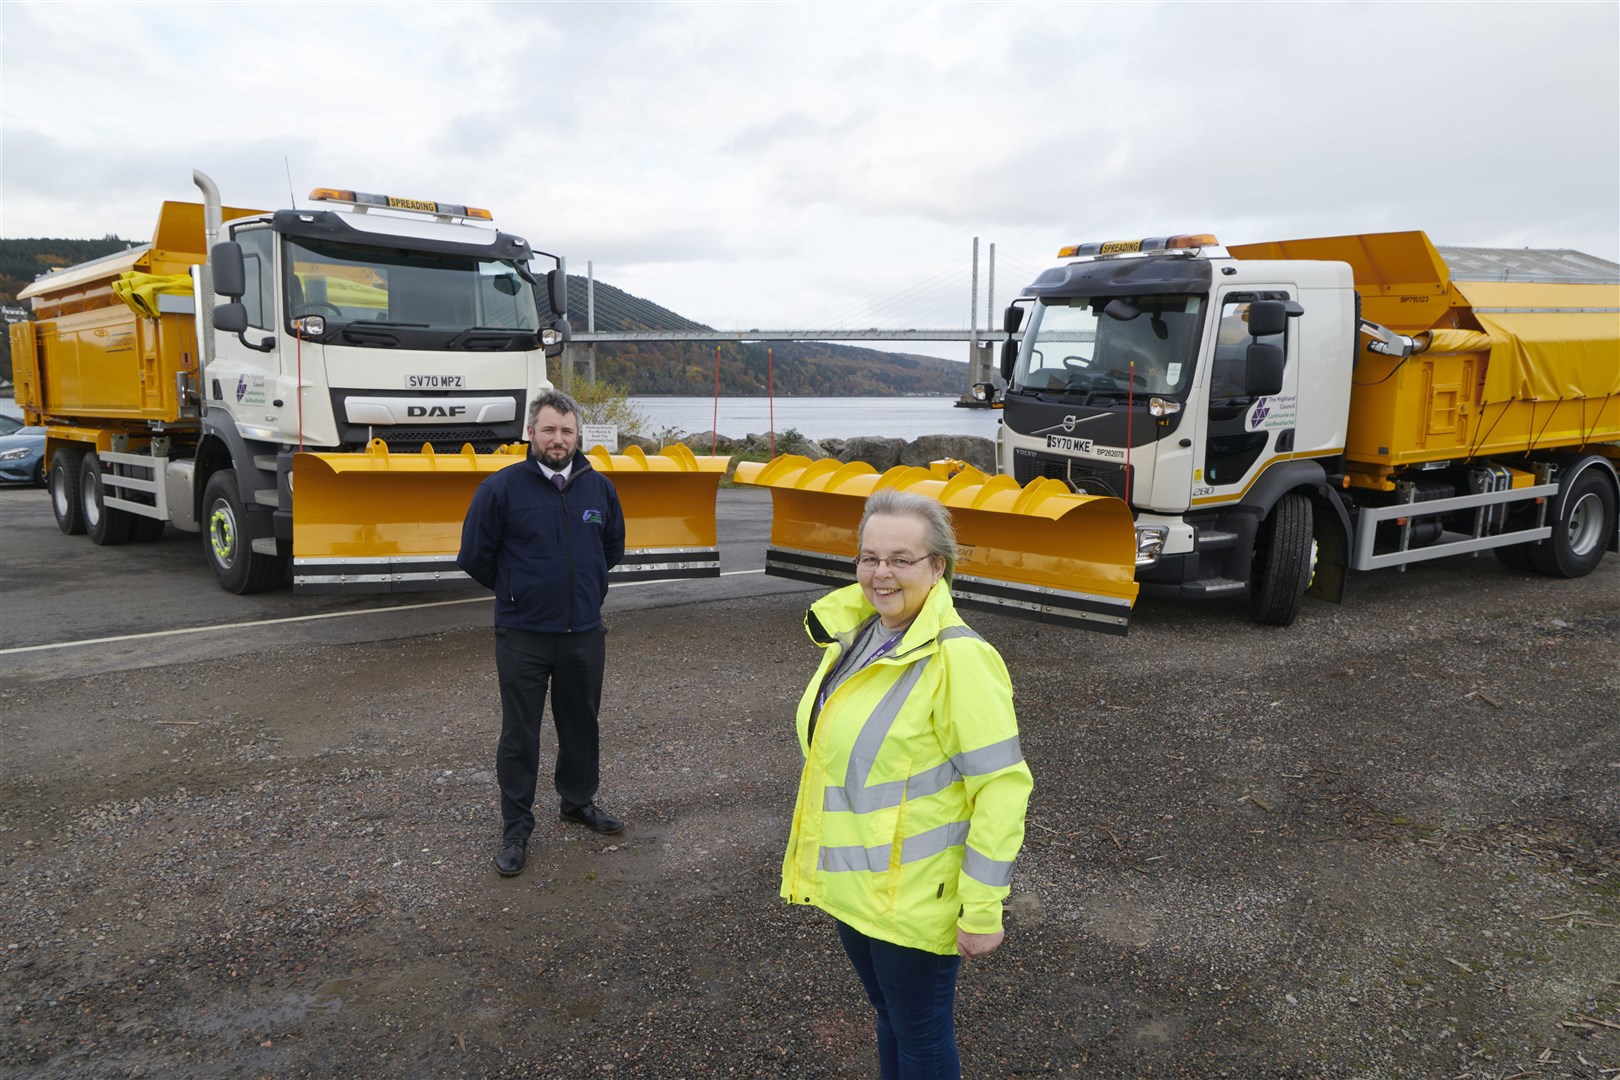 Highland councillor Trish Robertson and the local authority's transport and logistics manager Mike Cooper with two of the new snowploughs.